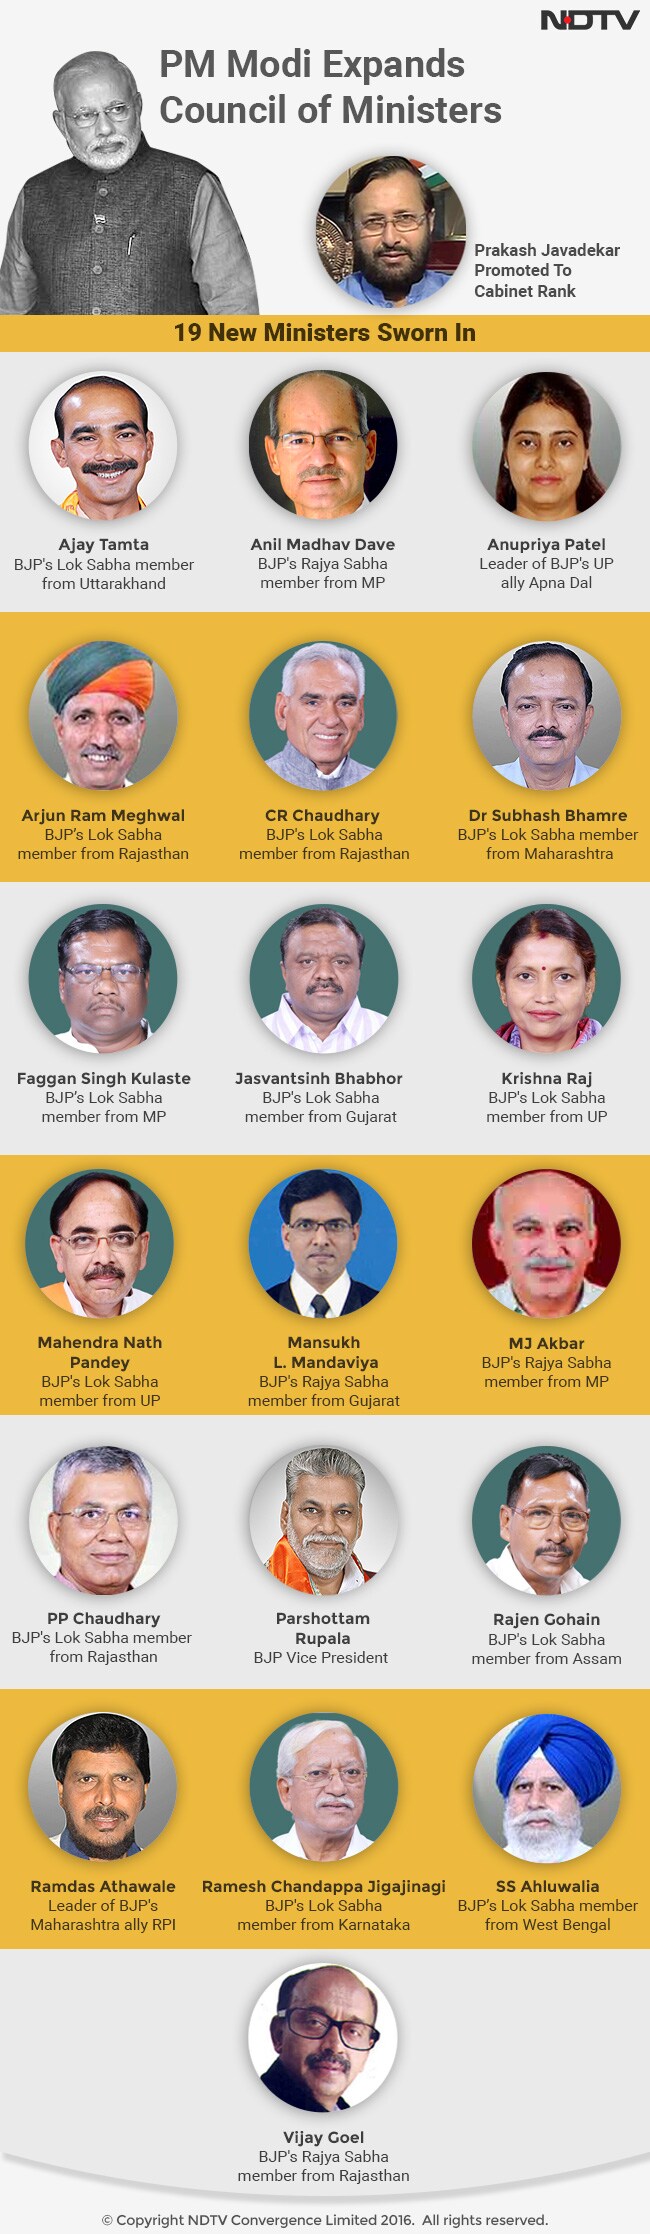 Meet The New Faces Included In PM Modi\'s Council Of Ministers